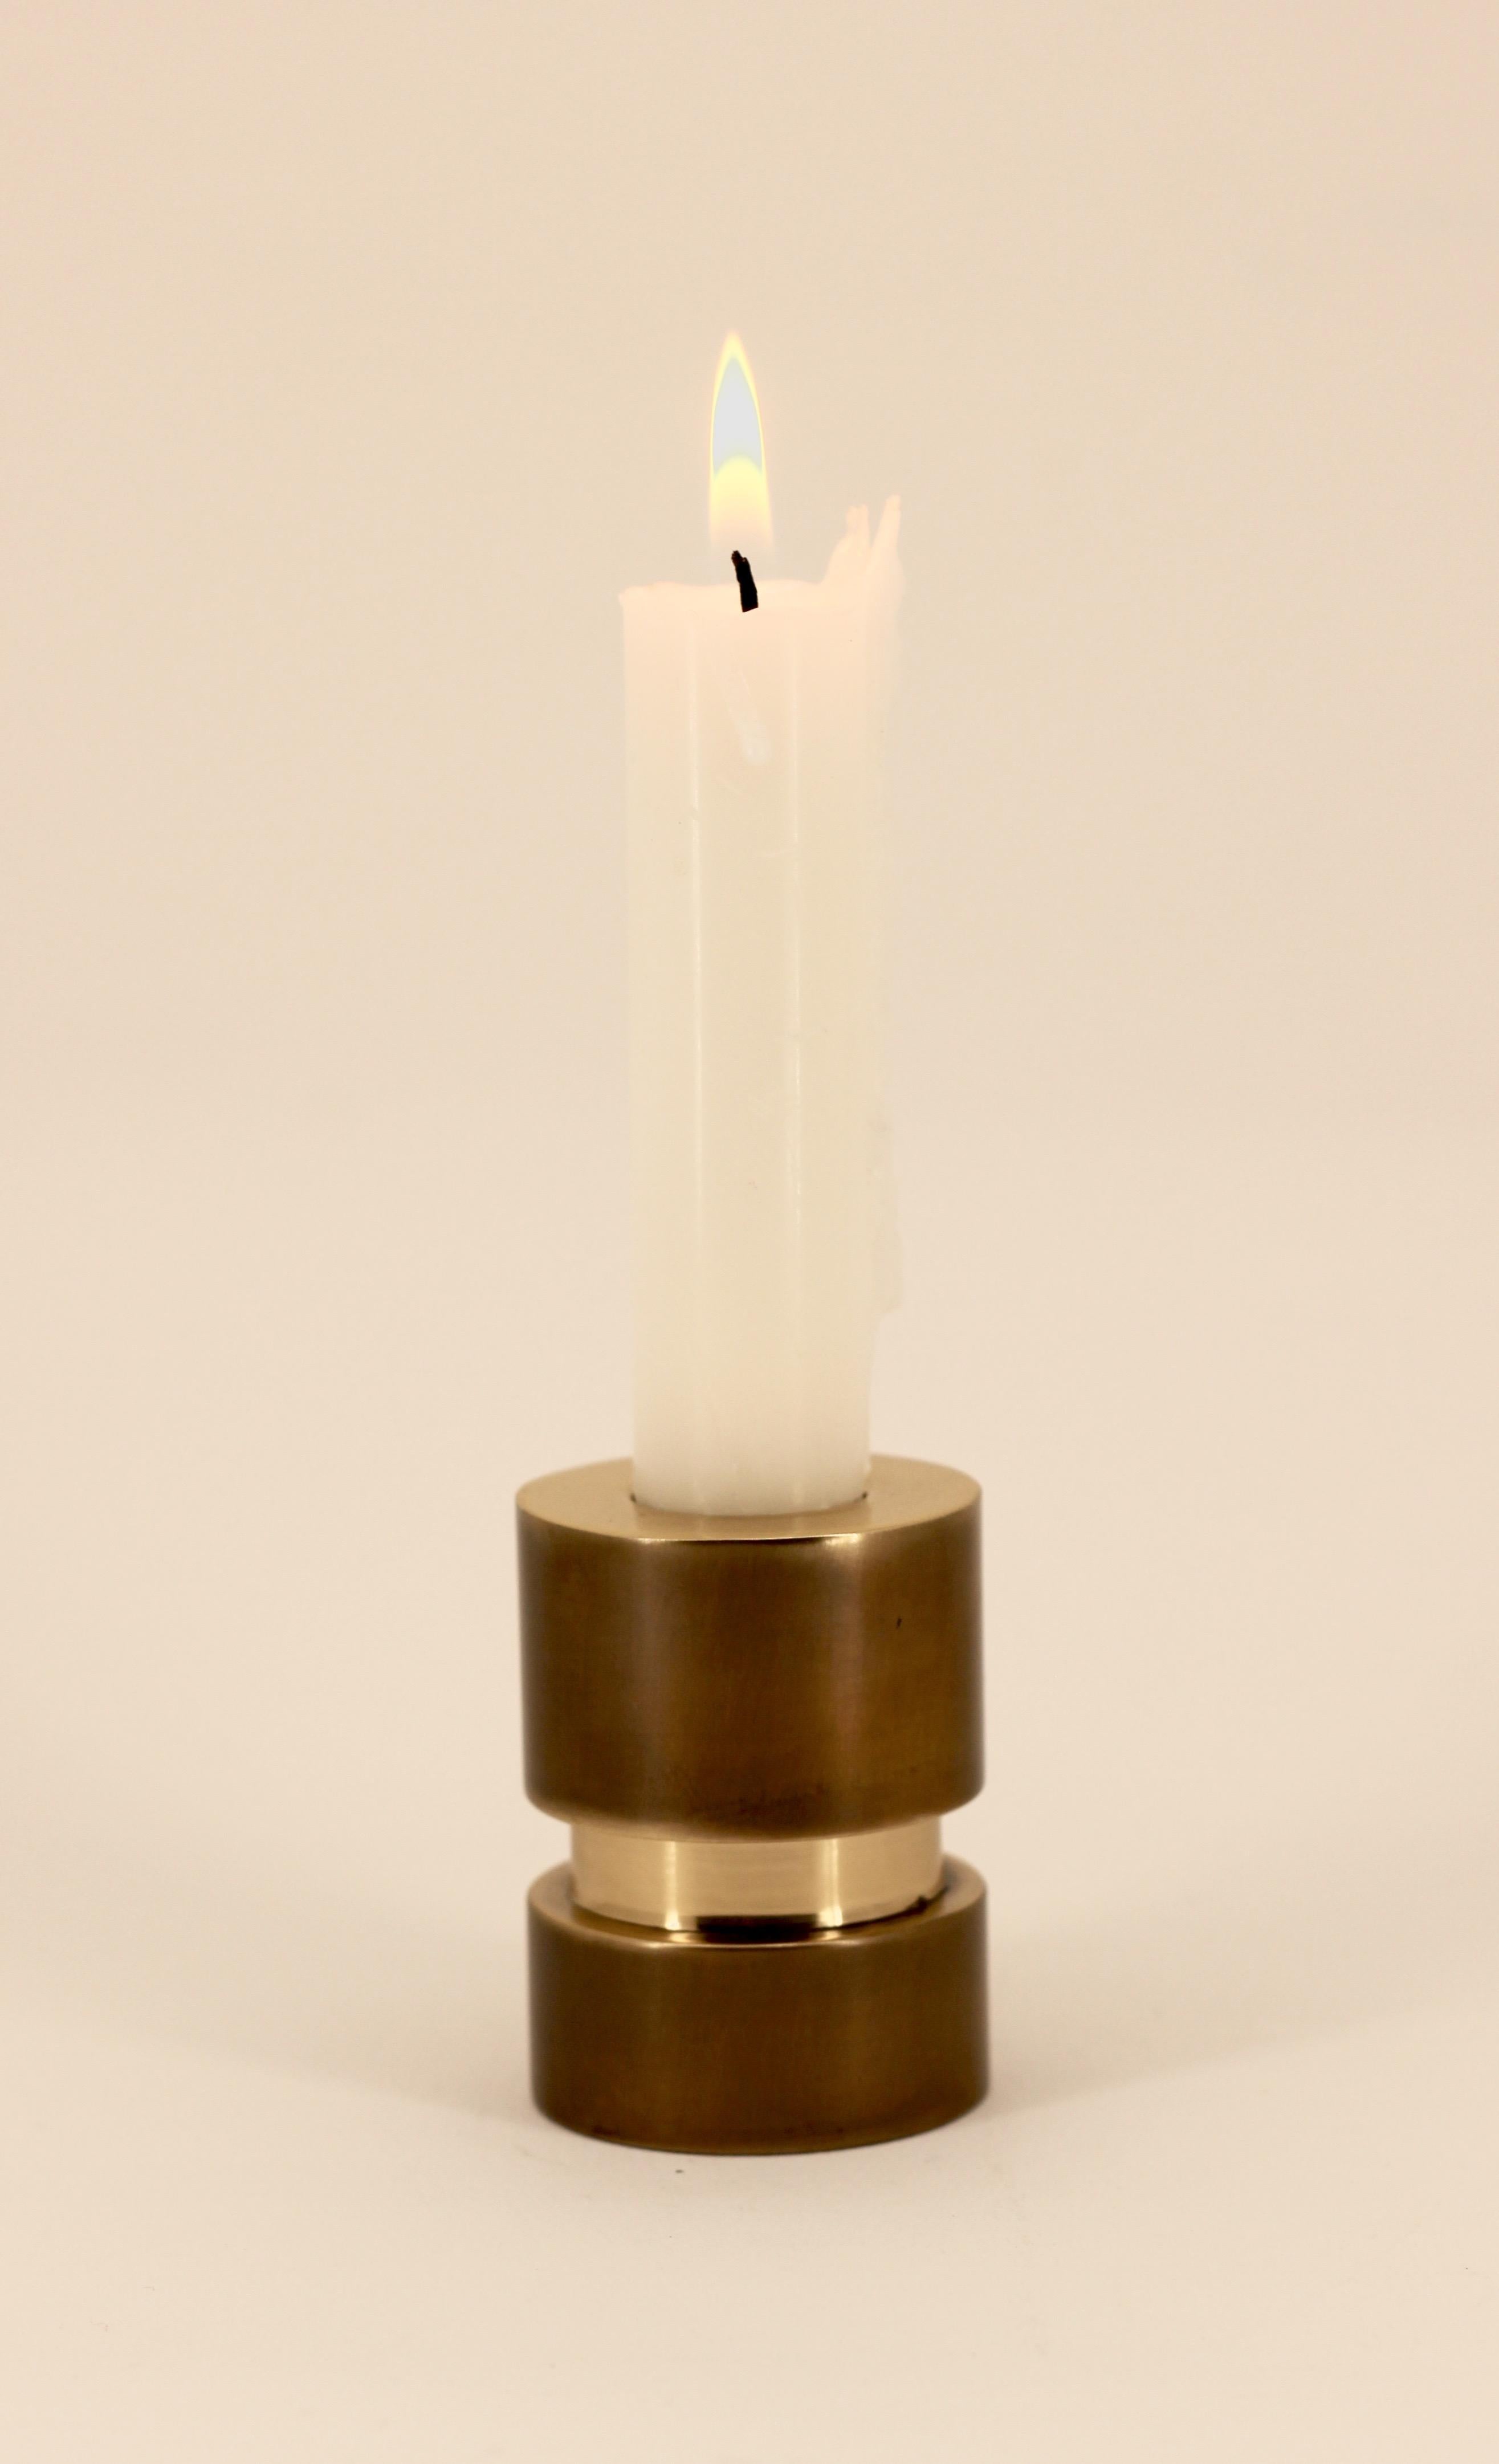 Ingenious and very charming reversible handmade cast brass candle / tea-light holder. Just reverse the piece whether you wish to use it to hold a candle or a tea-light.

Solid brass and cast using very traditional techniques, the piece is finished